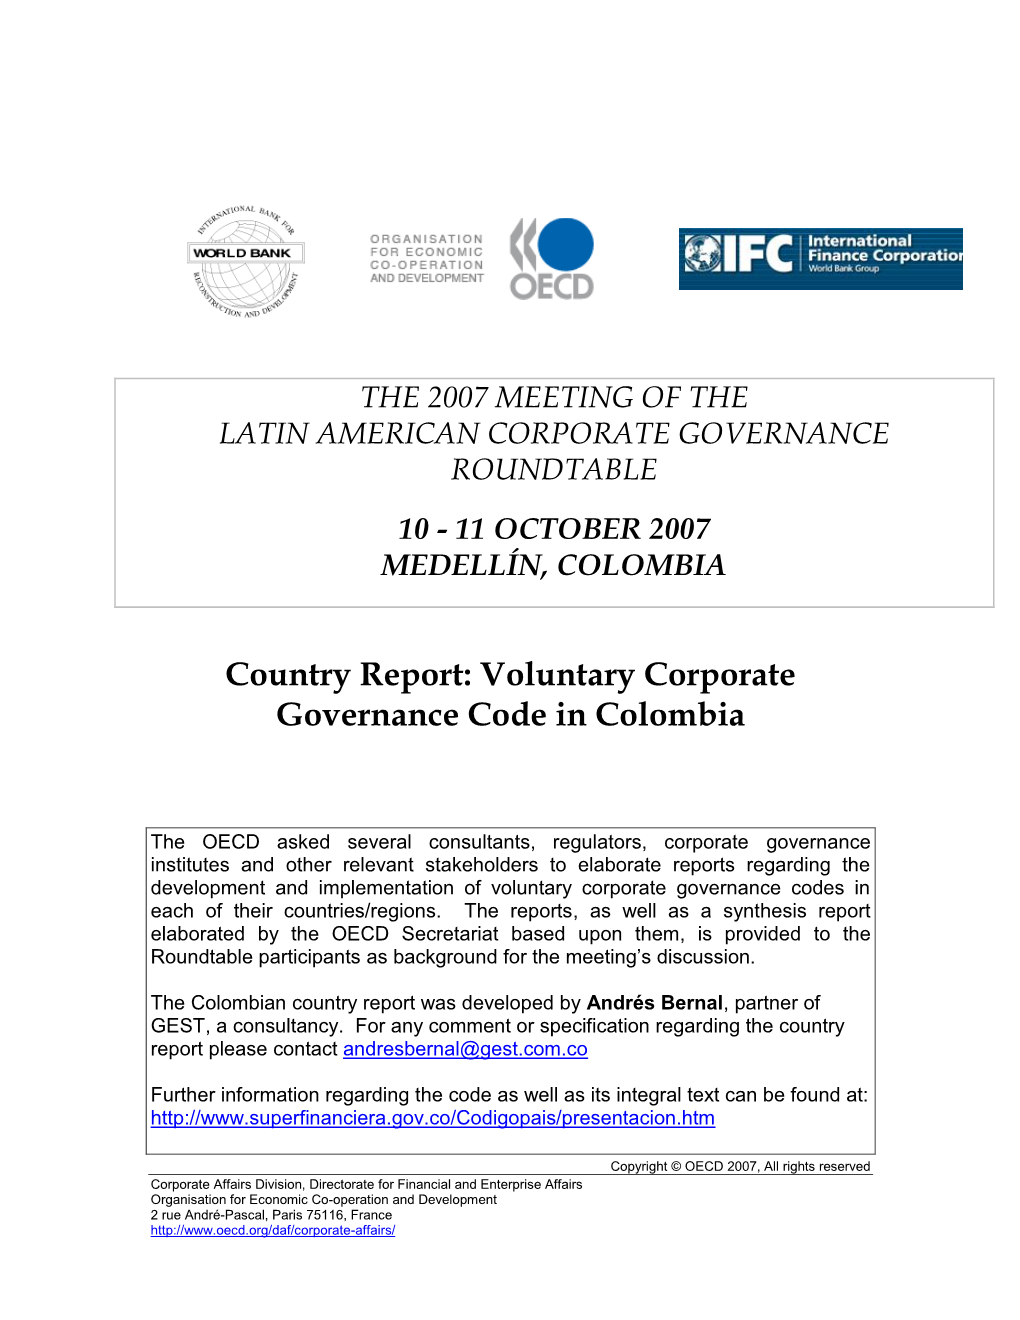 Voluntary Corporate Governance Code in Colombia